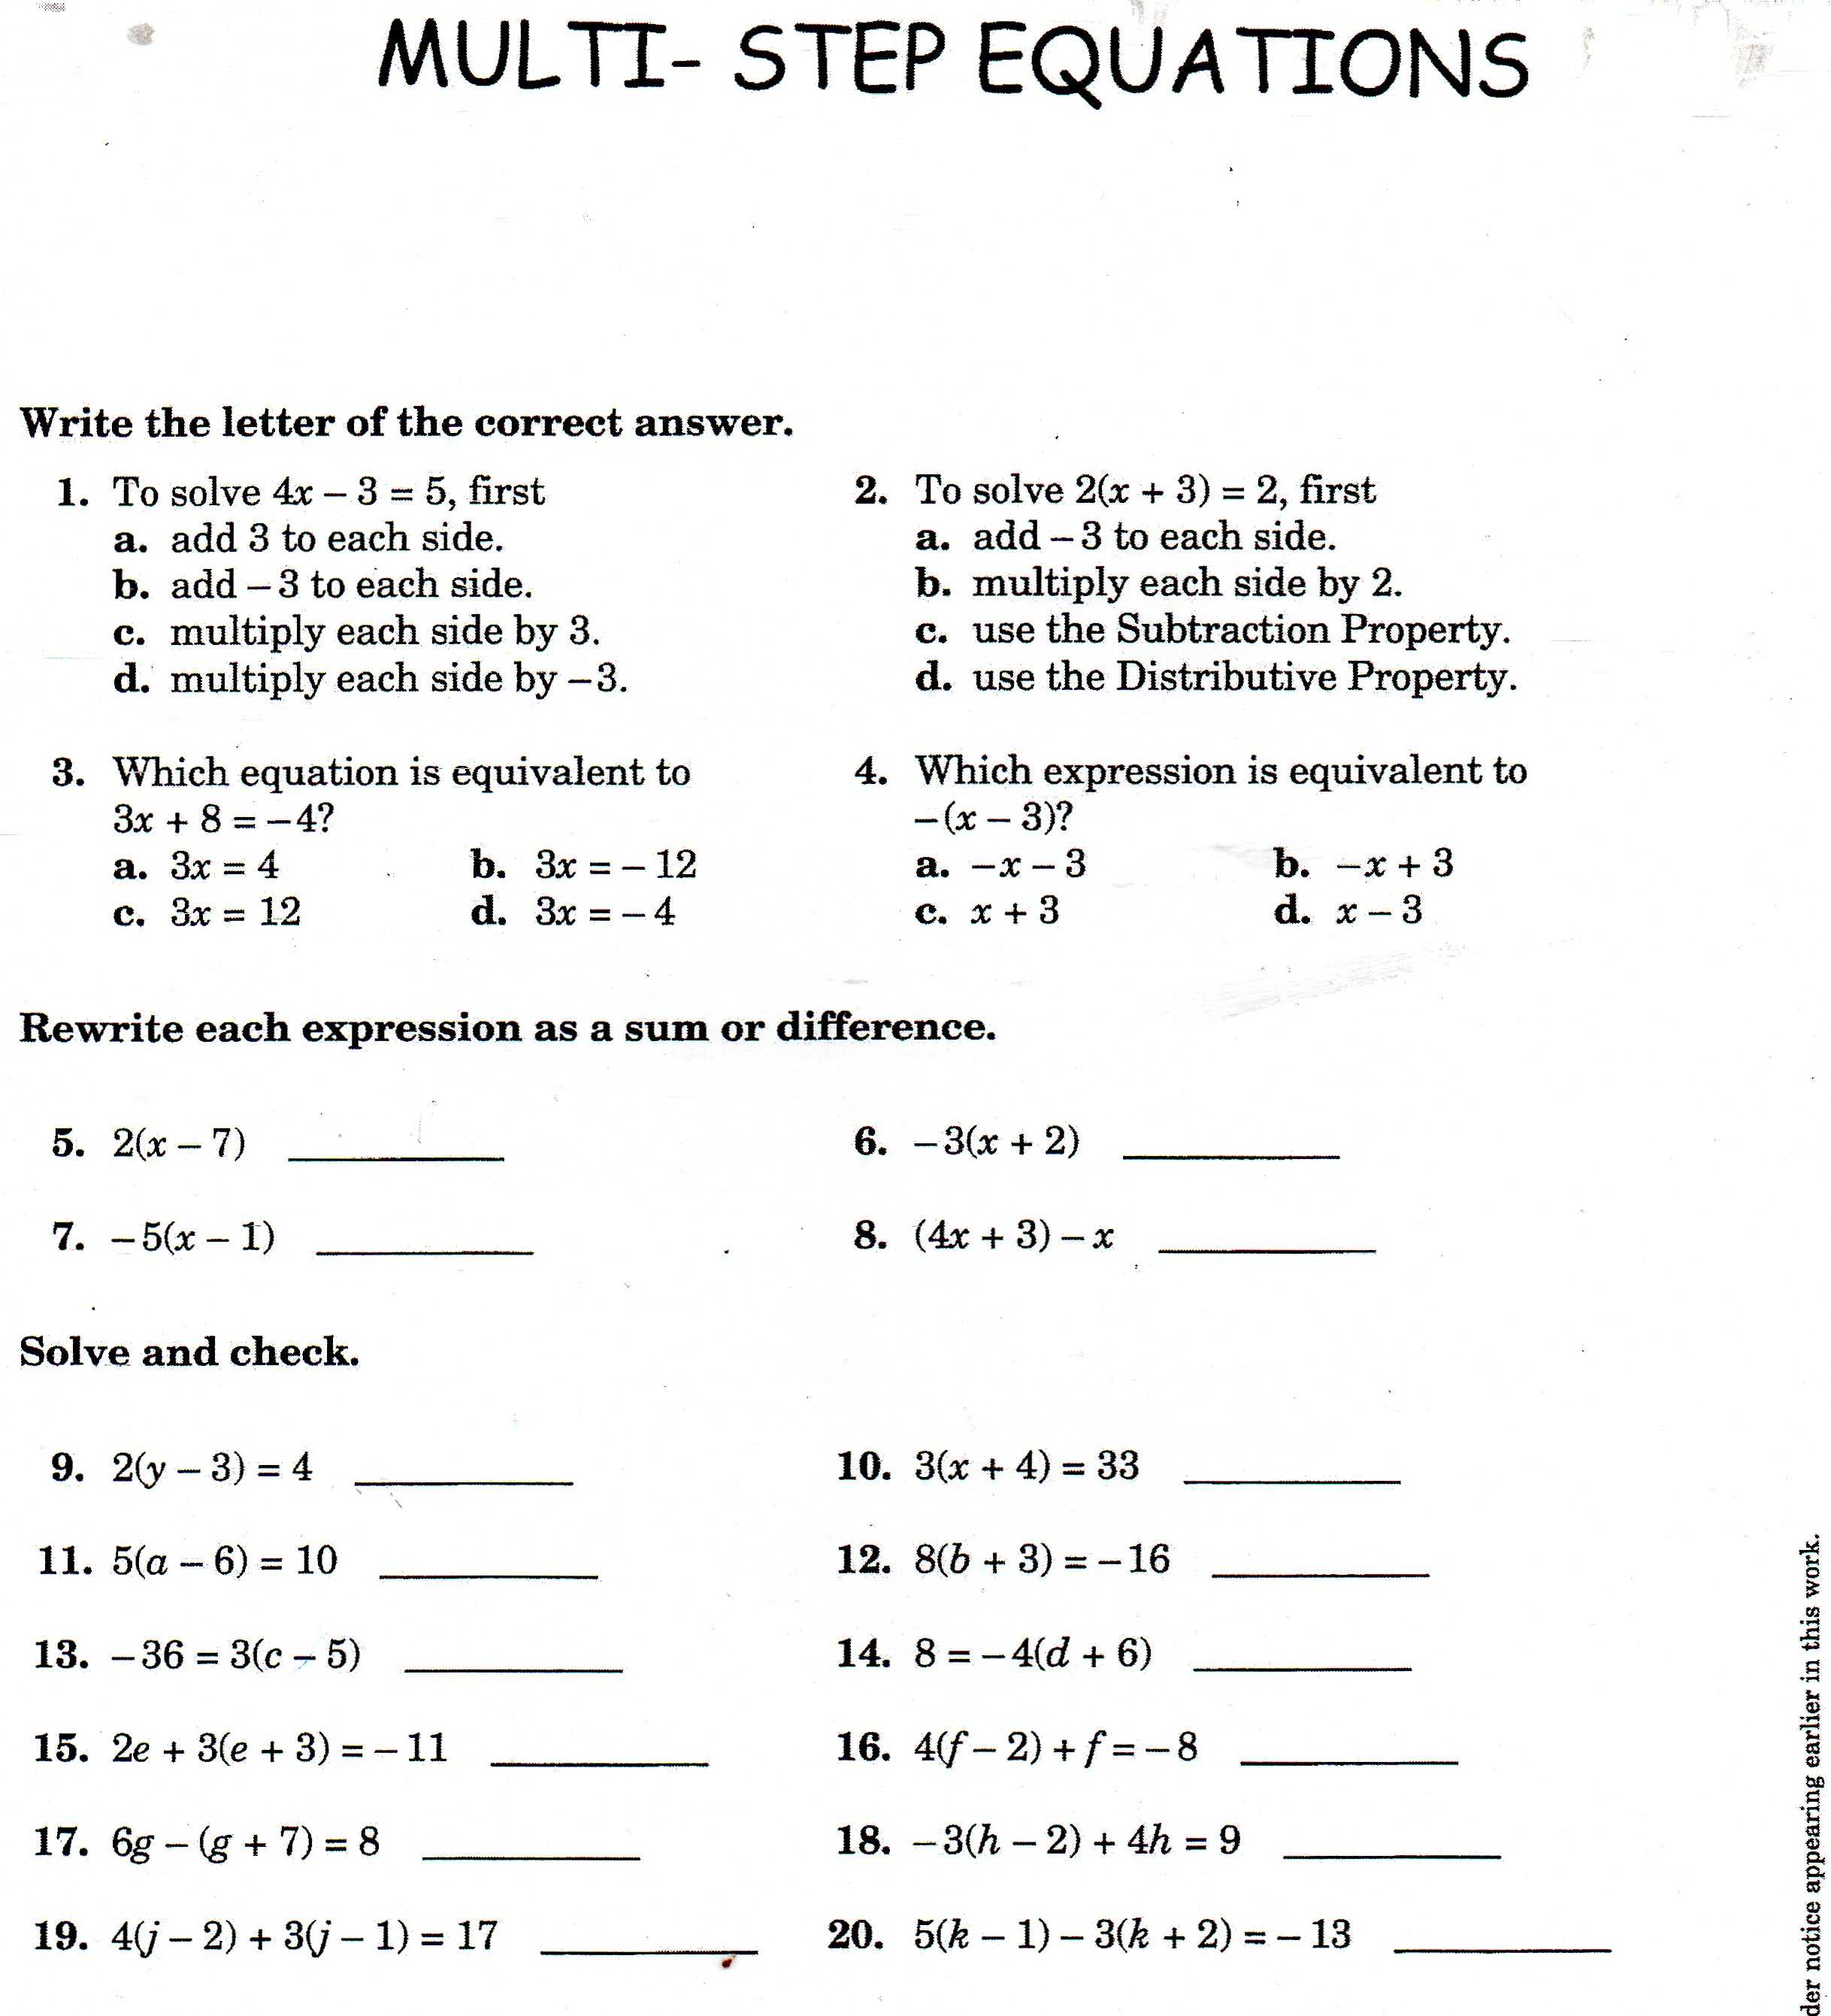 Solving Equations with Variables On Both Sides Worksheet Answers Along with Writing A Good College Application Essay Your Steps to College